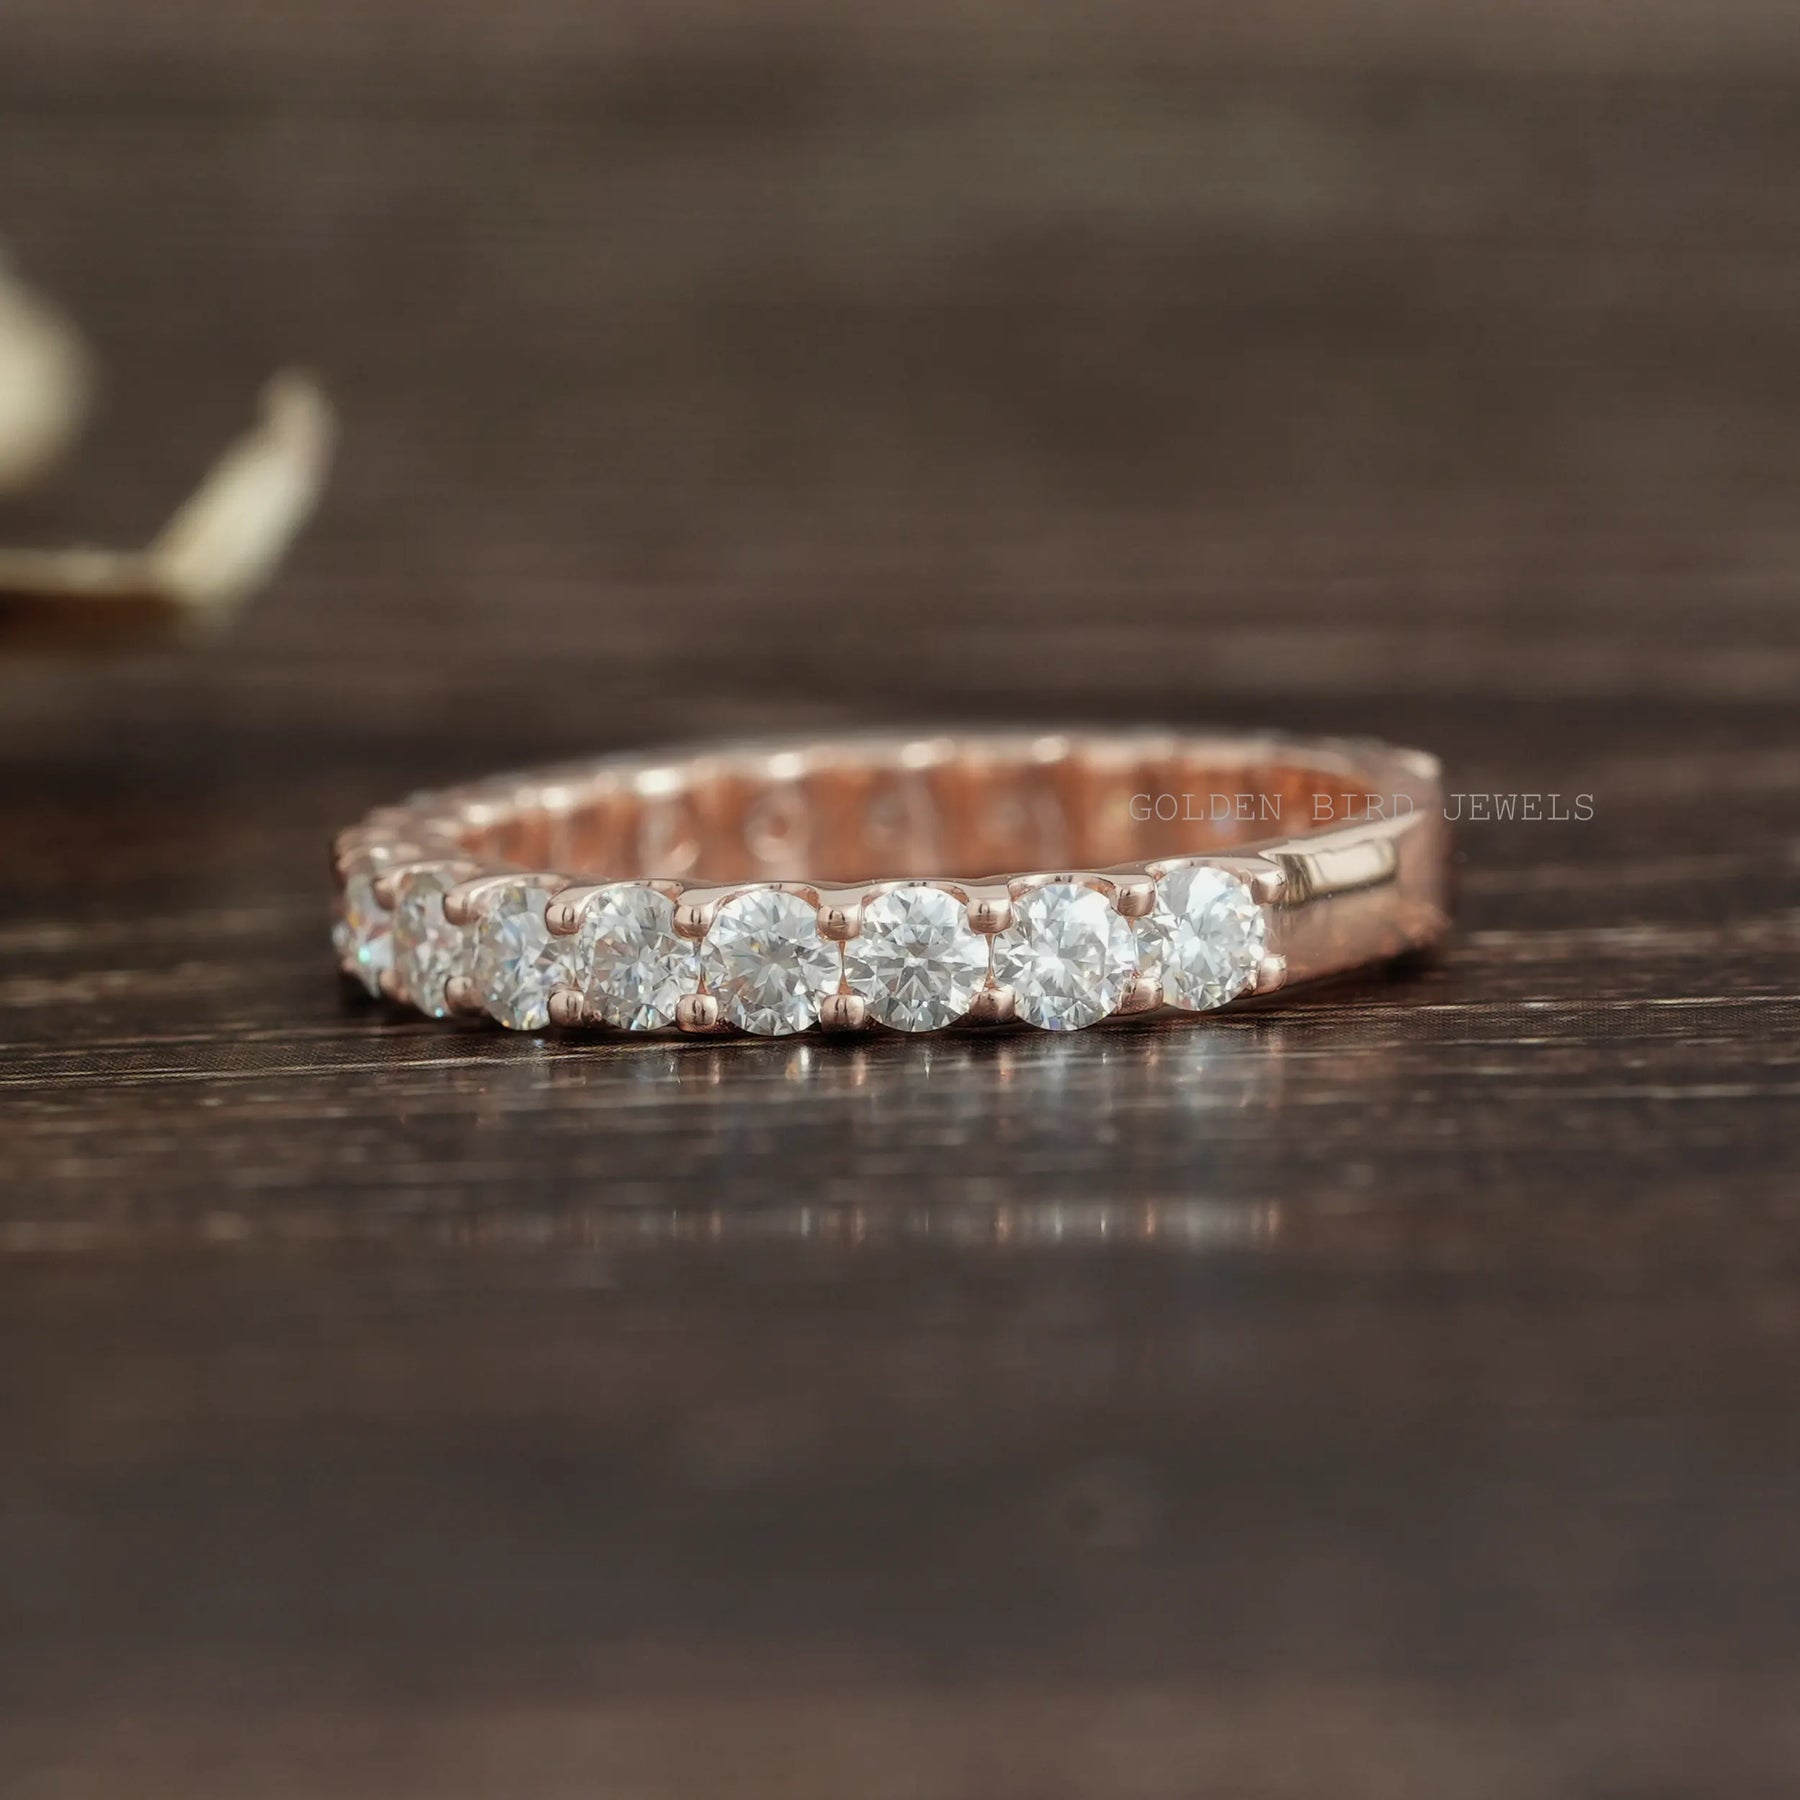 [Brilliant Colorless Round Cut Moissanite Wedding Eternity Band Crafted In 18K Rose Gold ]-[Golden Bird Jewels]